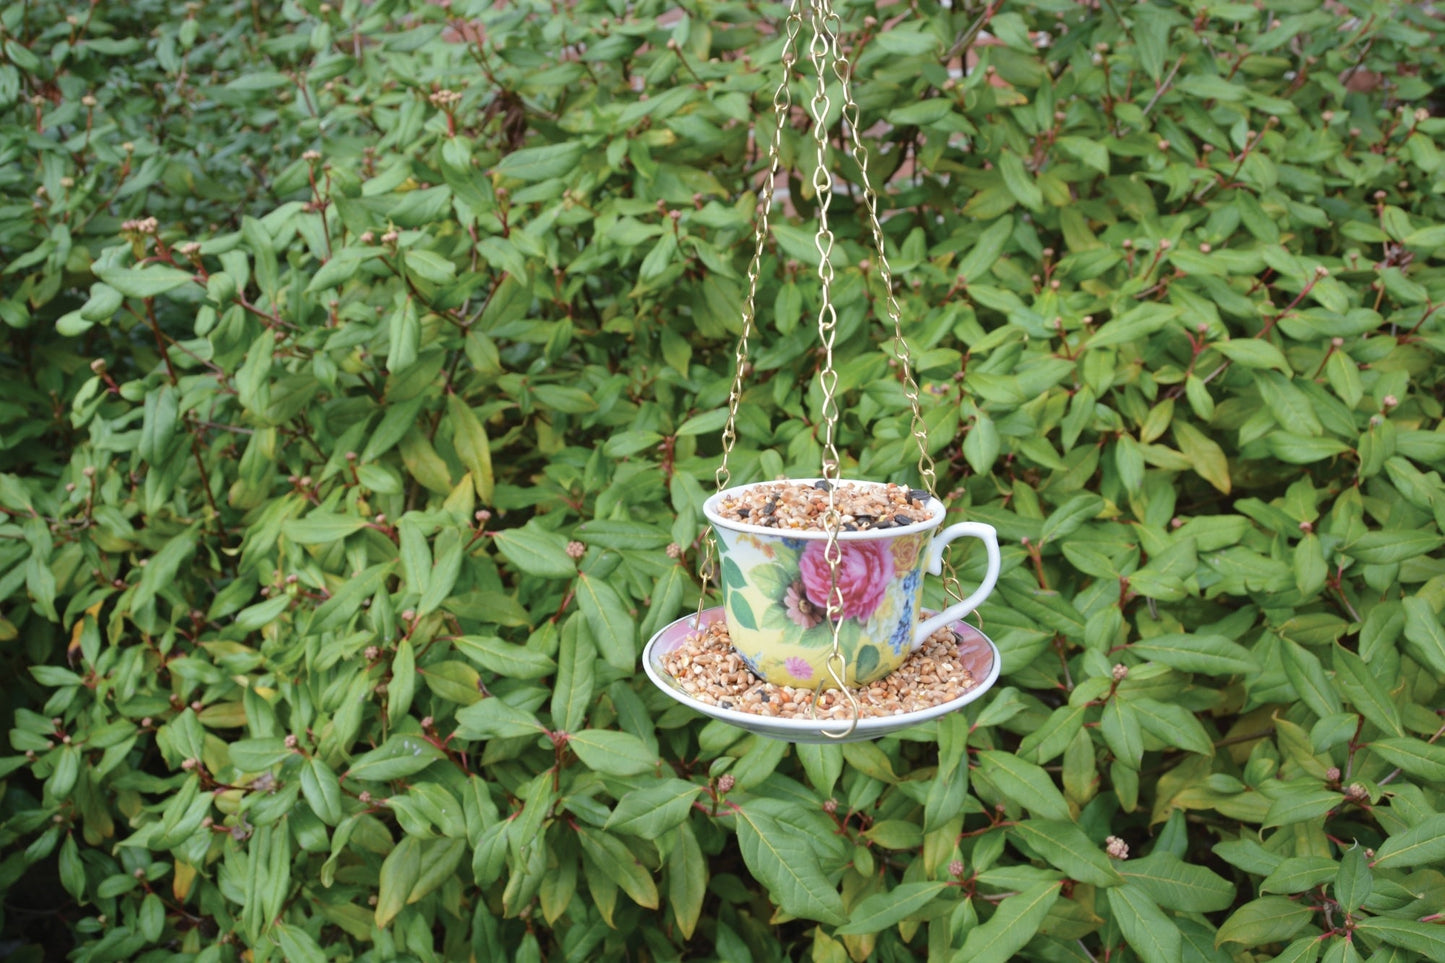 Hanging Teacup Feeder in Giftbox